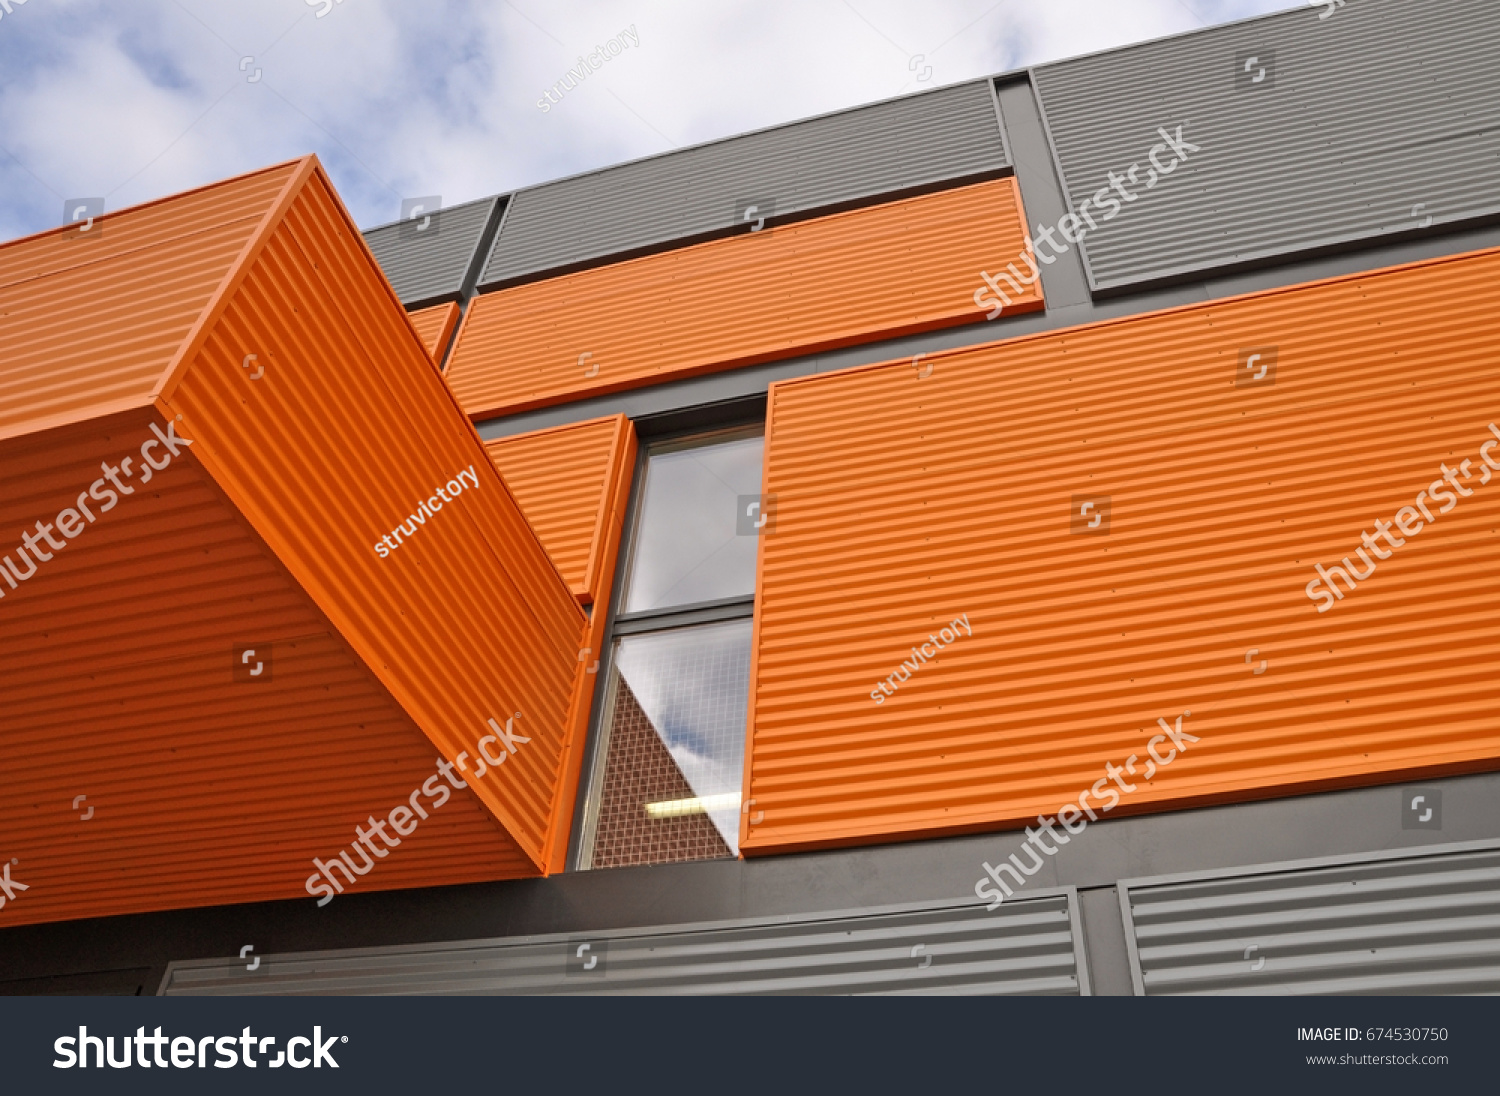 Architectural background. Wall of the modern orange and black corrugated metal panels. Look up. #674530750